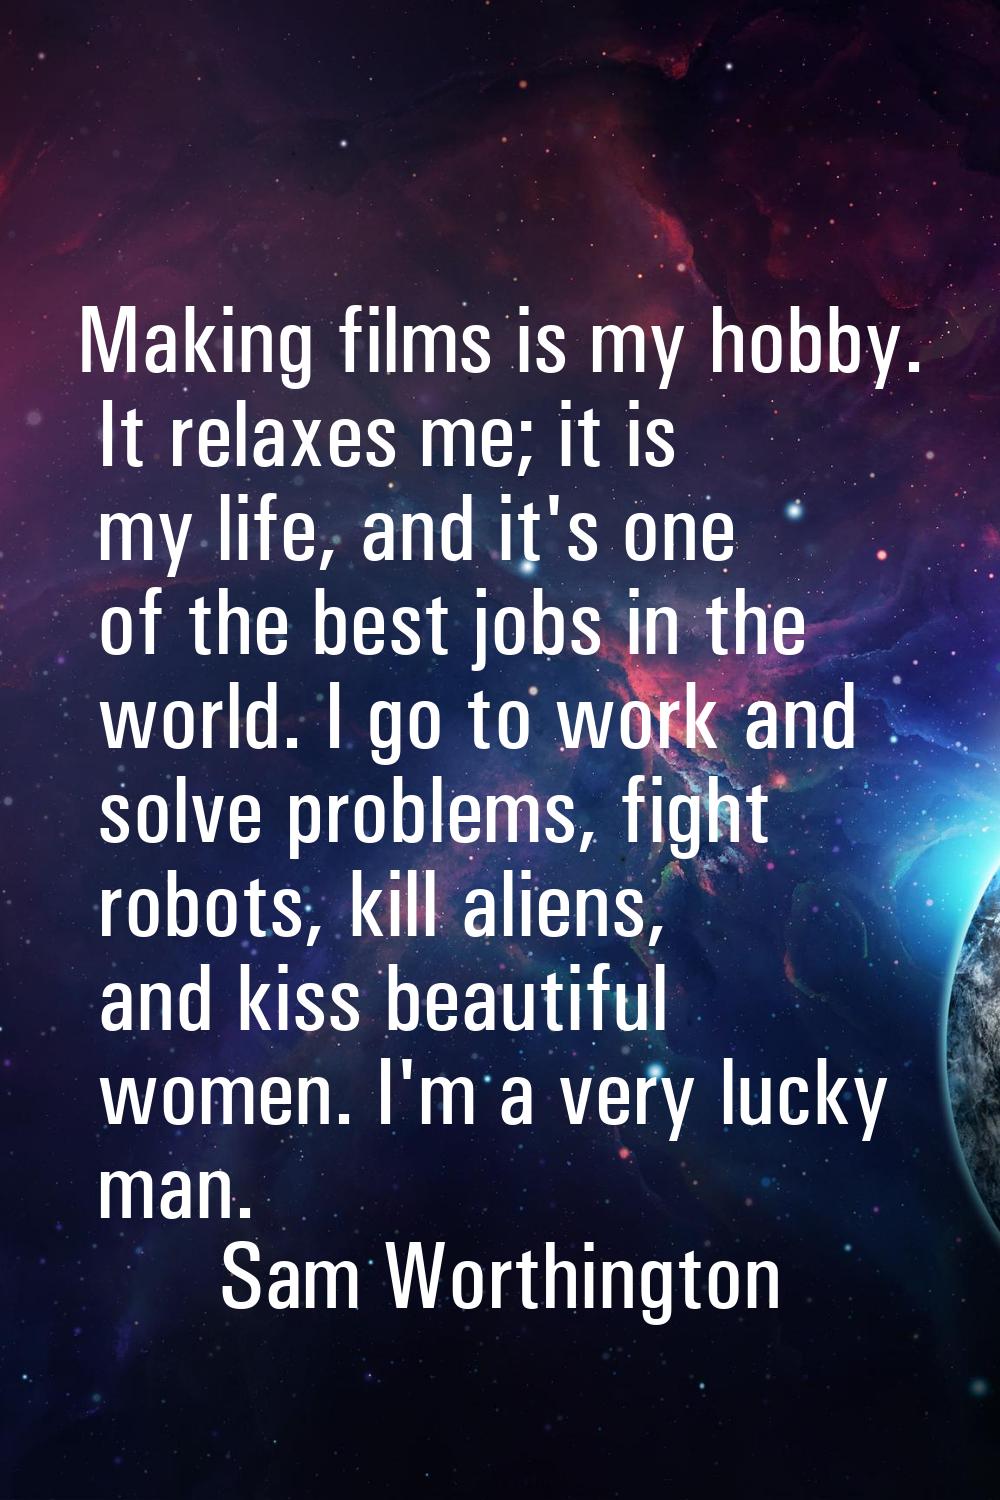 Making films is my hobby. It relaxes me; it is my life, and it's one of the best jobs in the world.